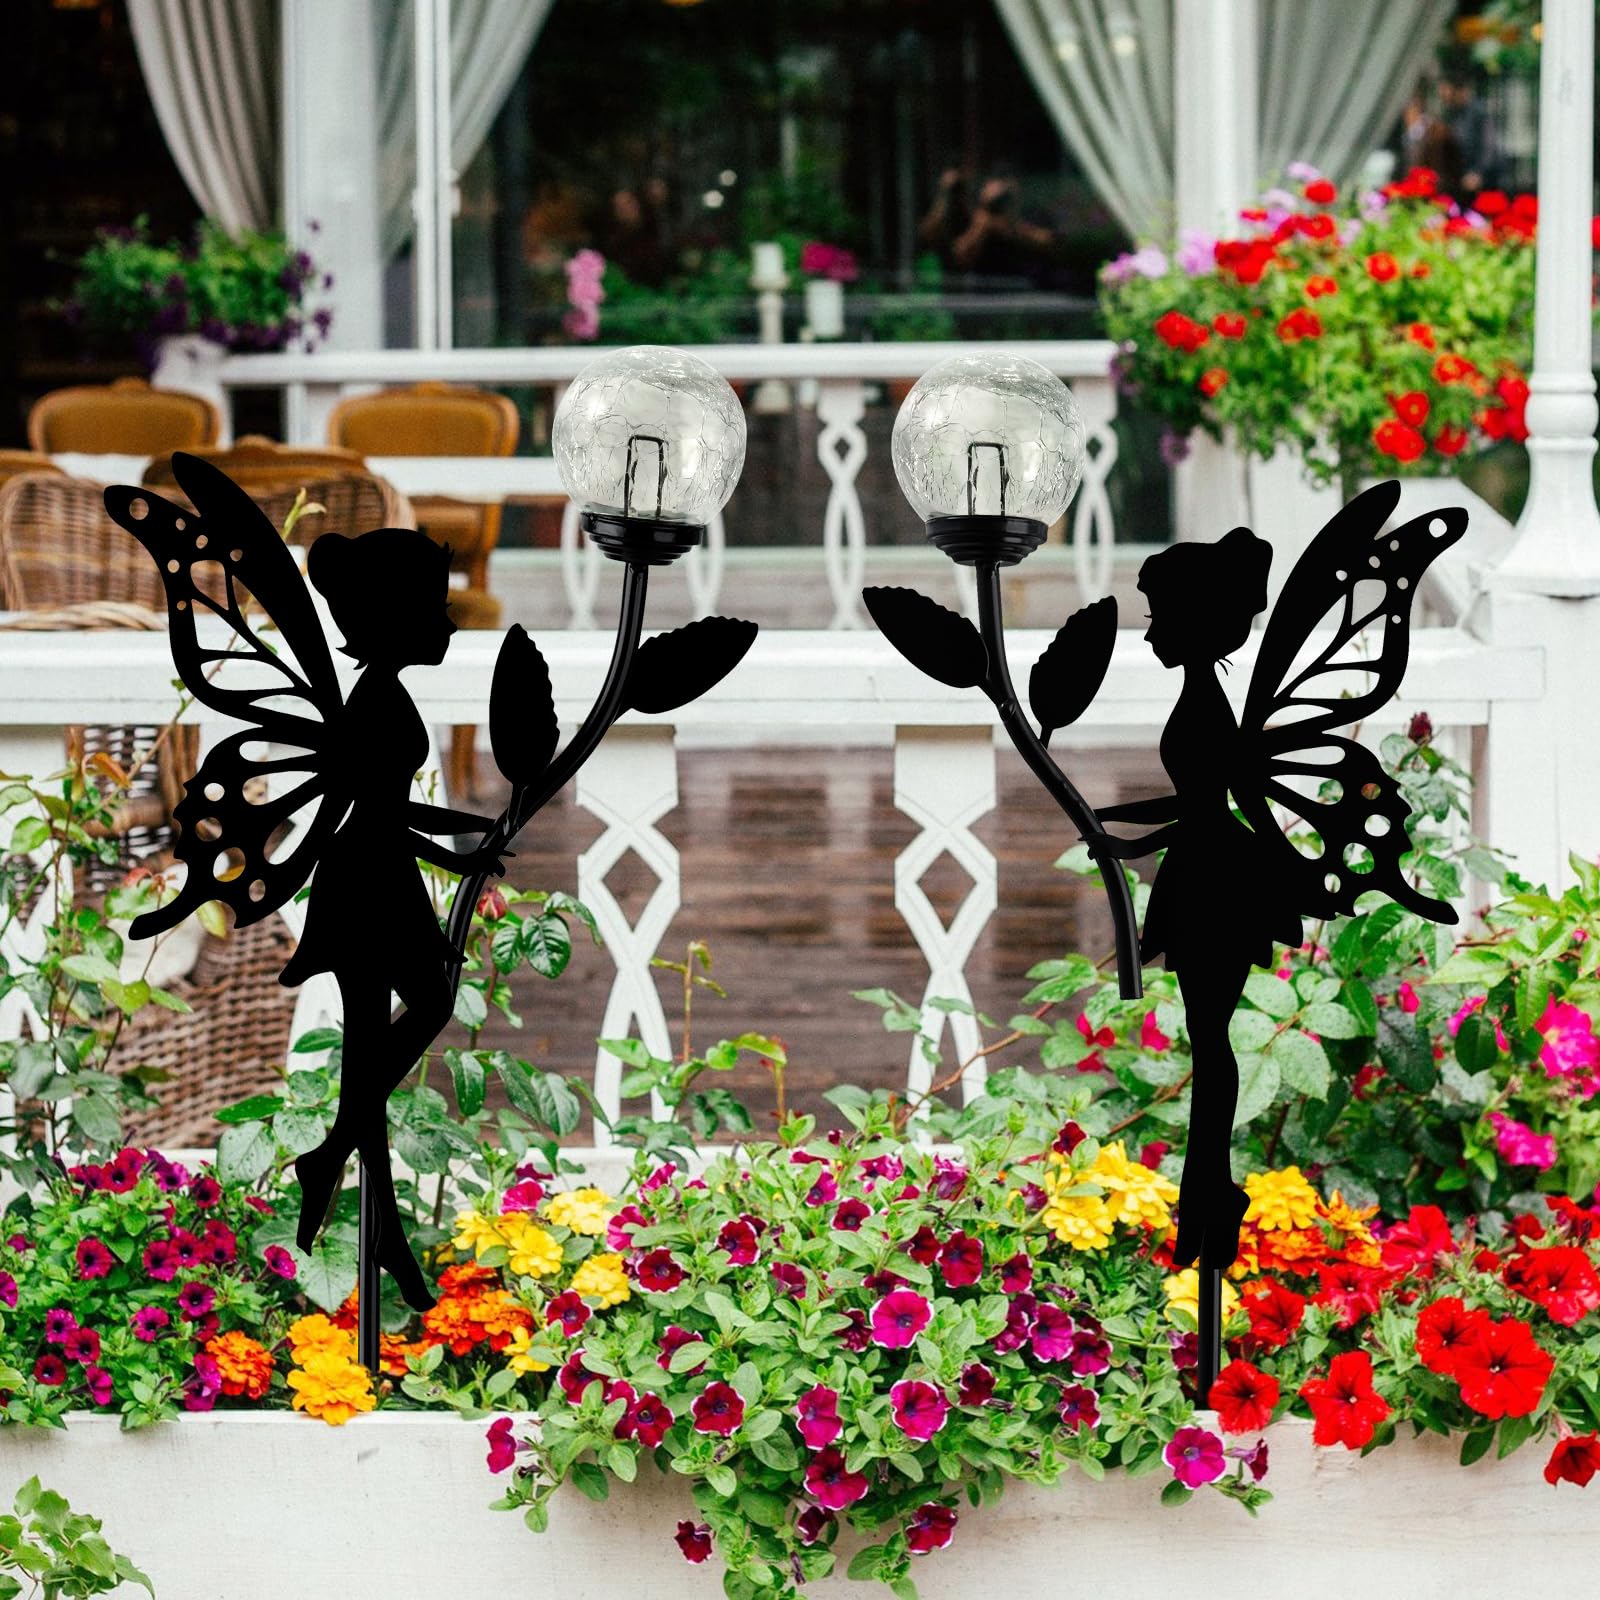 Ouddy Decor 2 Pack Solar Fairy Garden Decor, With Waterproof for Lawn Patio Yard Pathway Gardening Gifts - UK GEMS